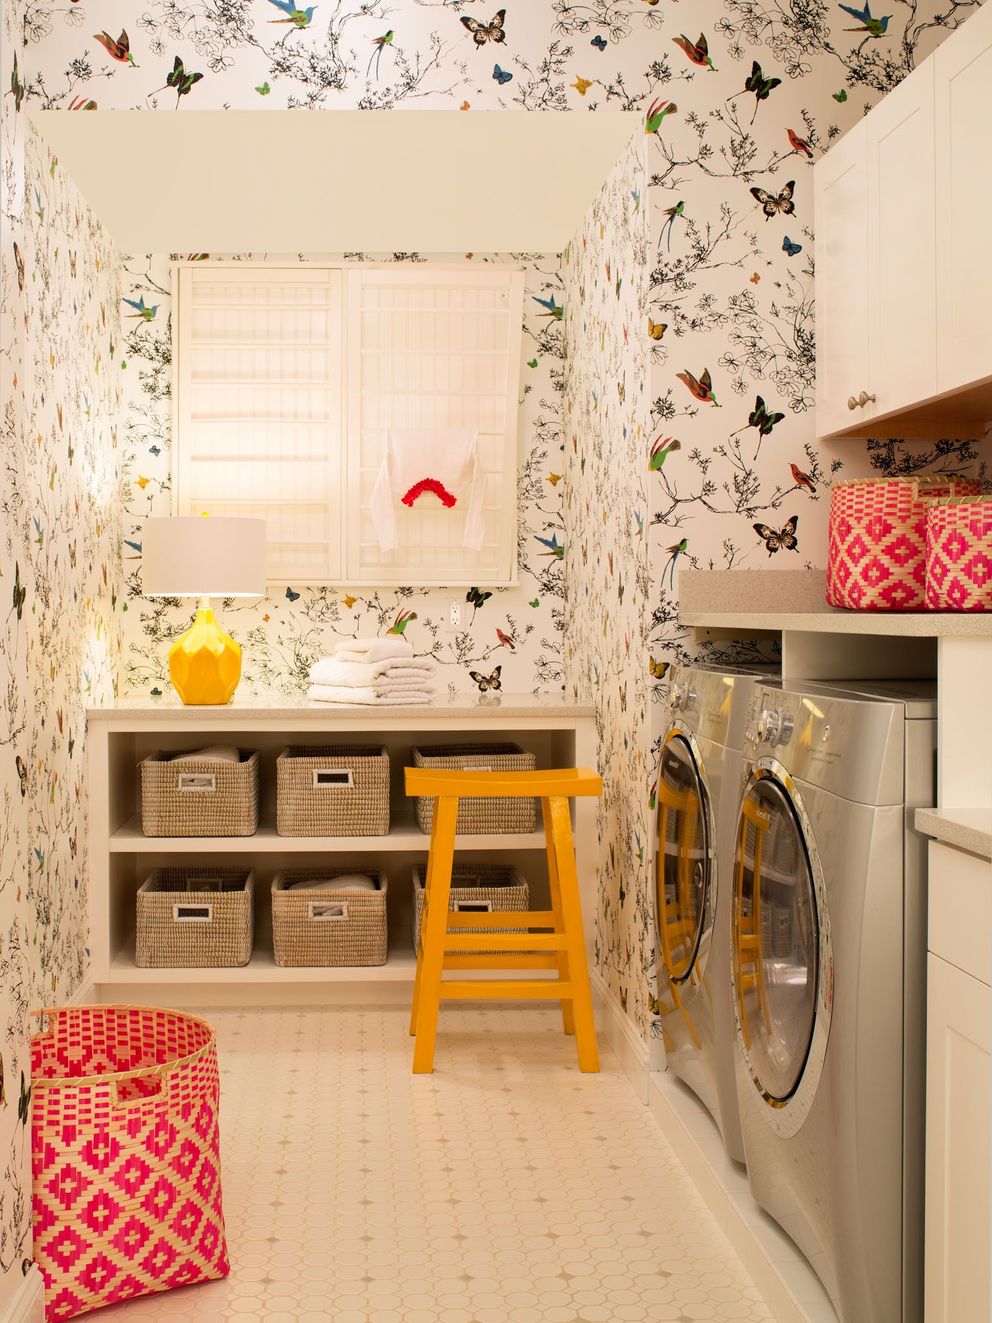 Laundry Room With Whimsical Butterfly Wallpaper ?width=992